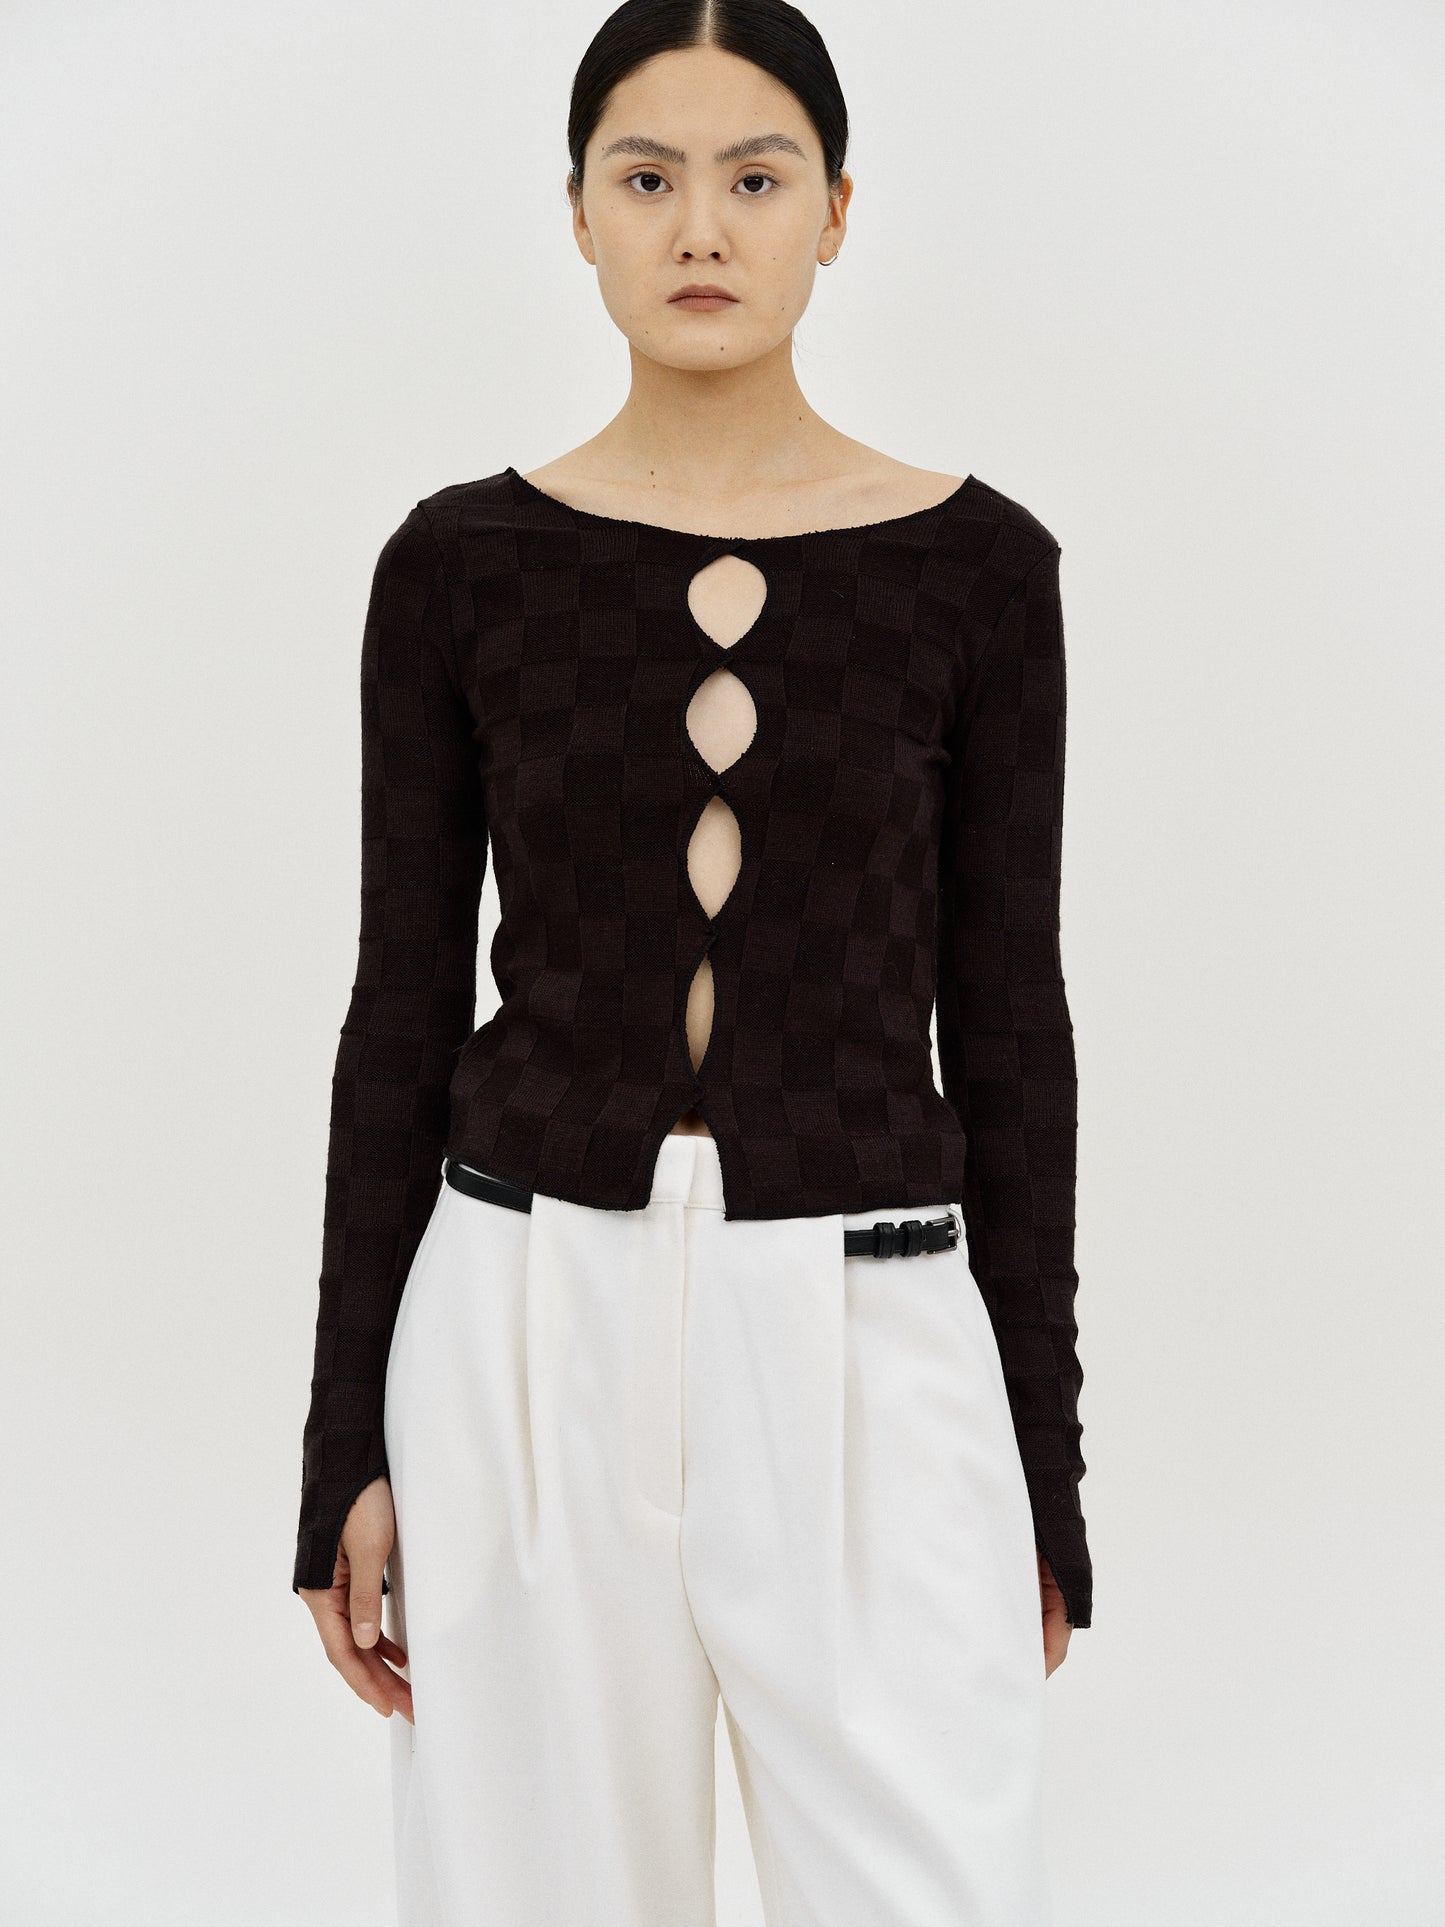 Cut-Out Check Knit Top, Black